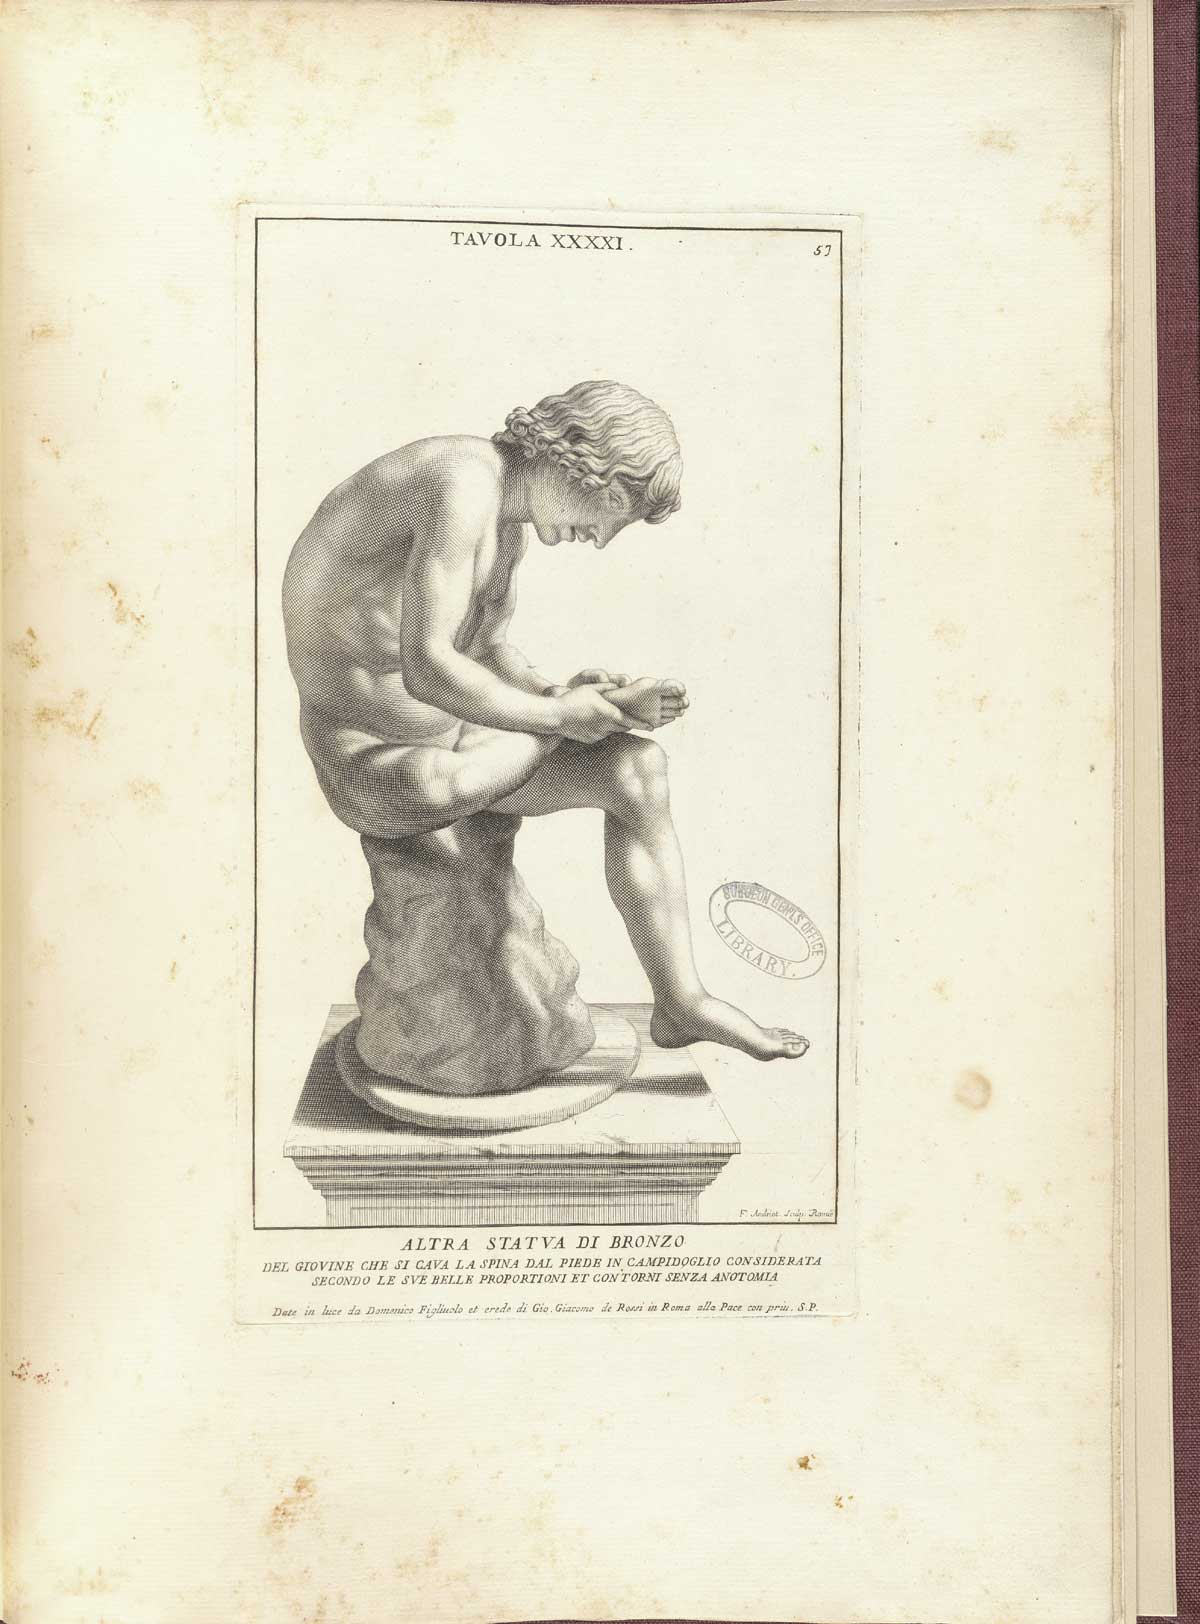 Engraving of the side view of a statue of a nude boy sitting on a stone hunched over removing a thorn from his right foot; from Bernardino Genga’s Anatomia per uso et intelligenza del disegno, NLM Call no.: WZ 250 G329an 1691.